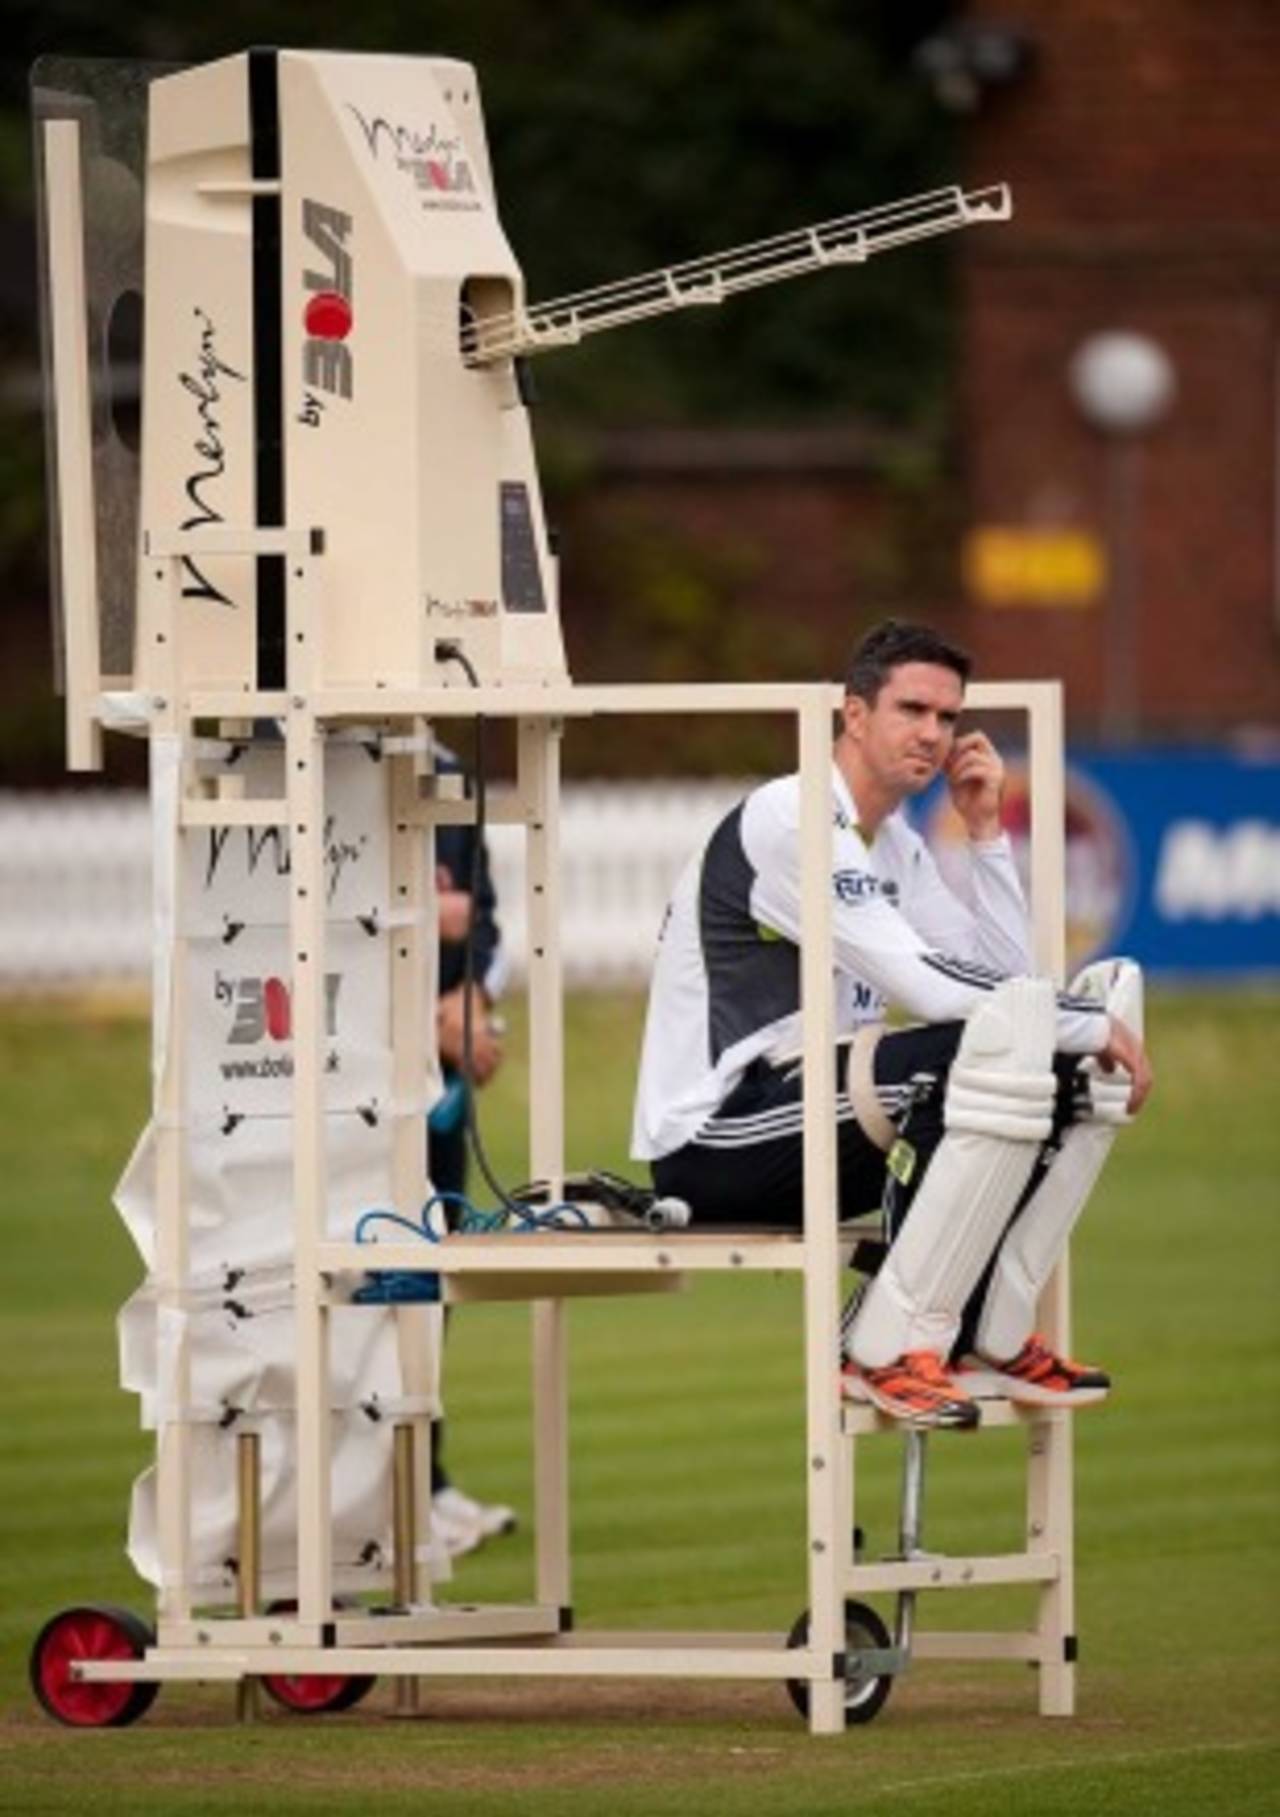 Kevin Pietersen contemplates the final Test while sat on Merlin the bowling machine, Lord's, August 25, 2010